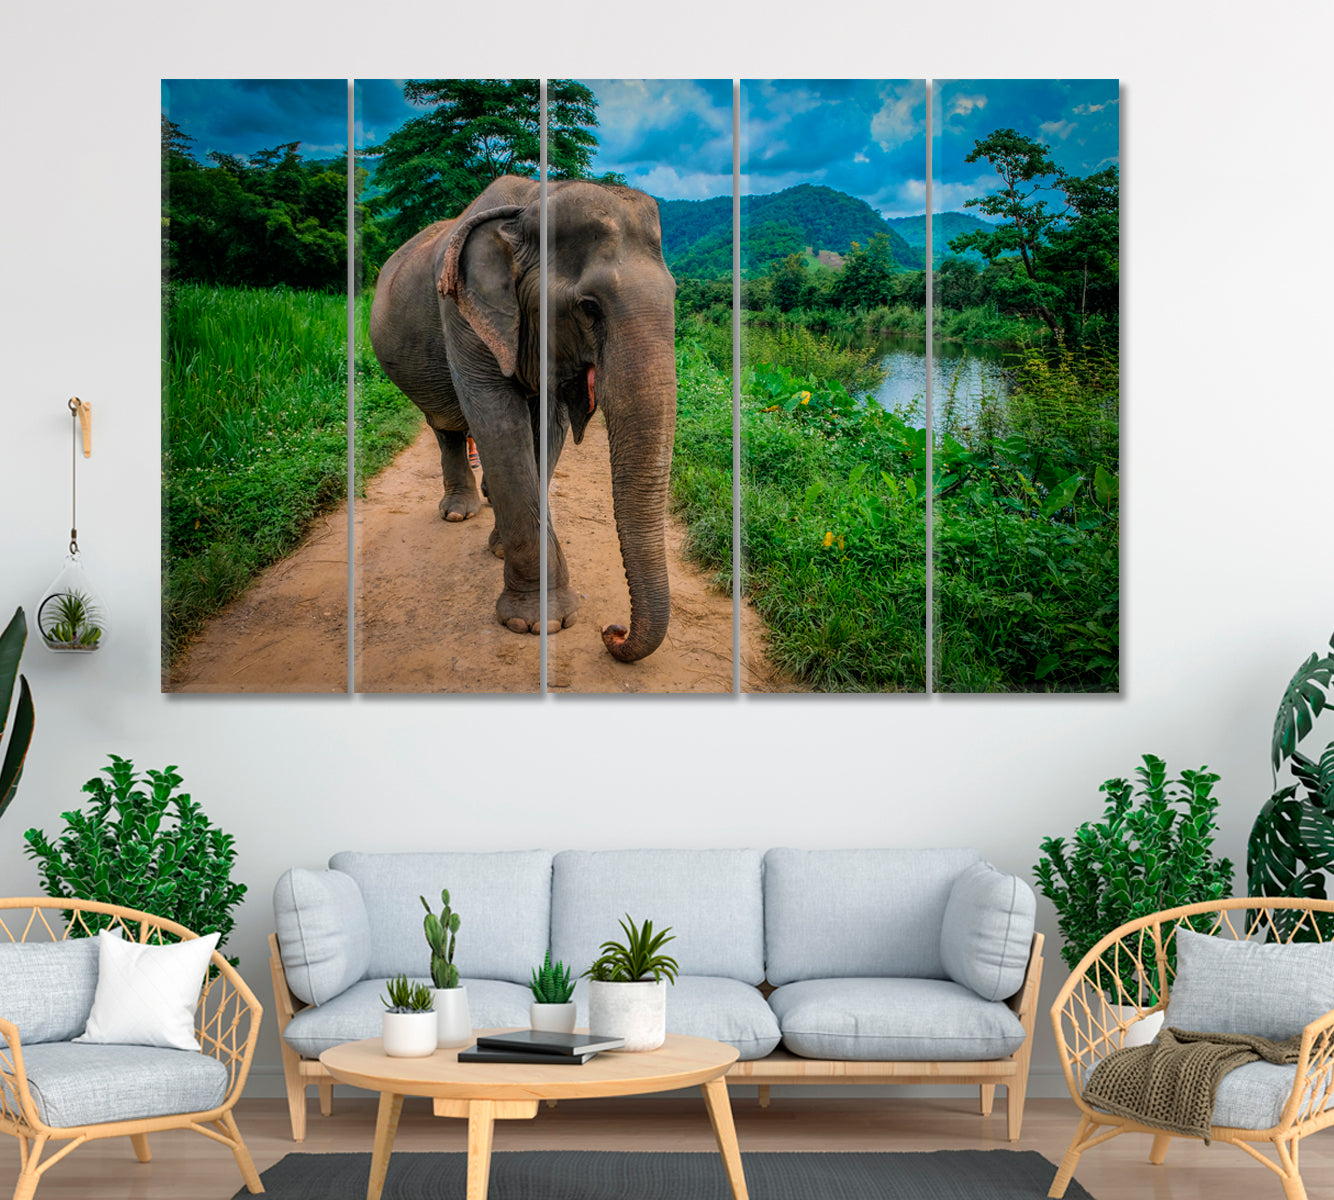 Asian Elephant at Elephant Nature Park in Chiang Mai Thailand Canvas Print ArtLexy 5 Panels 36"x24" inches 